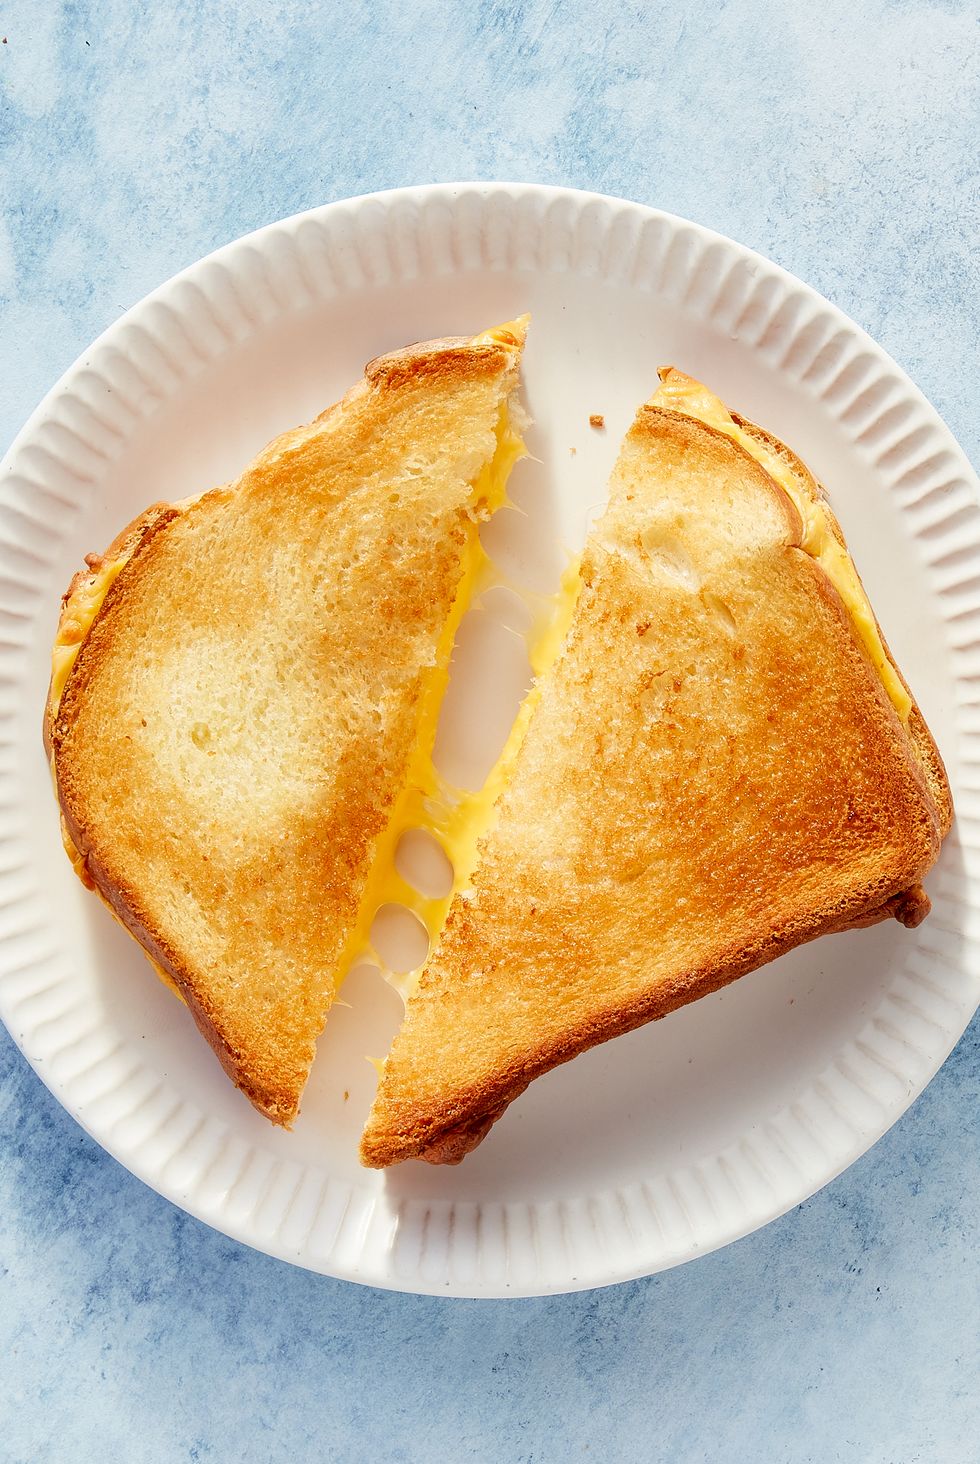 Cute Food For Kids?: Turn Toaster Sideways to Make Grilled Cheese